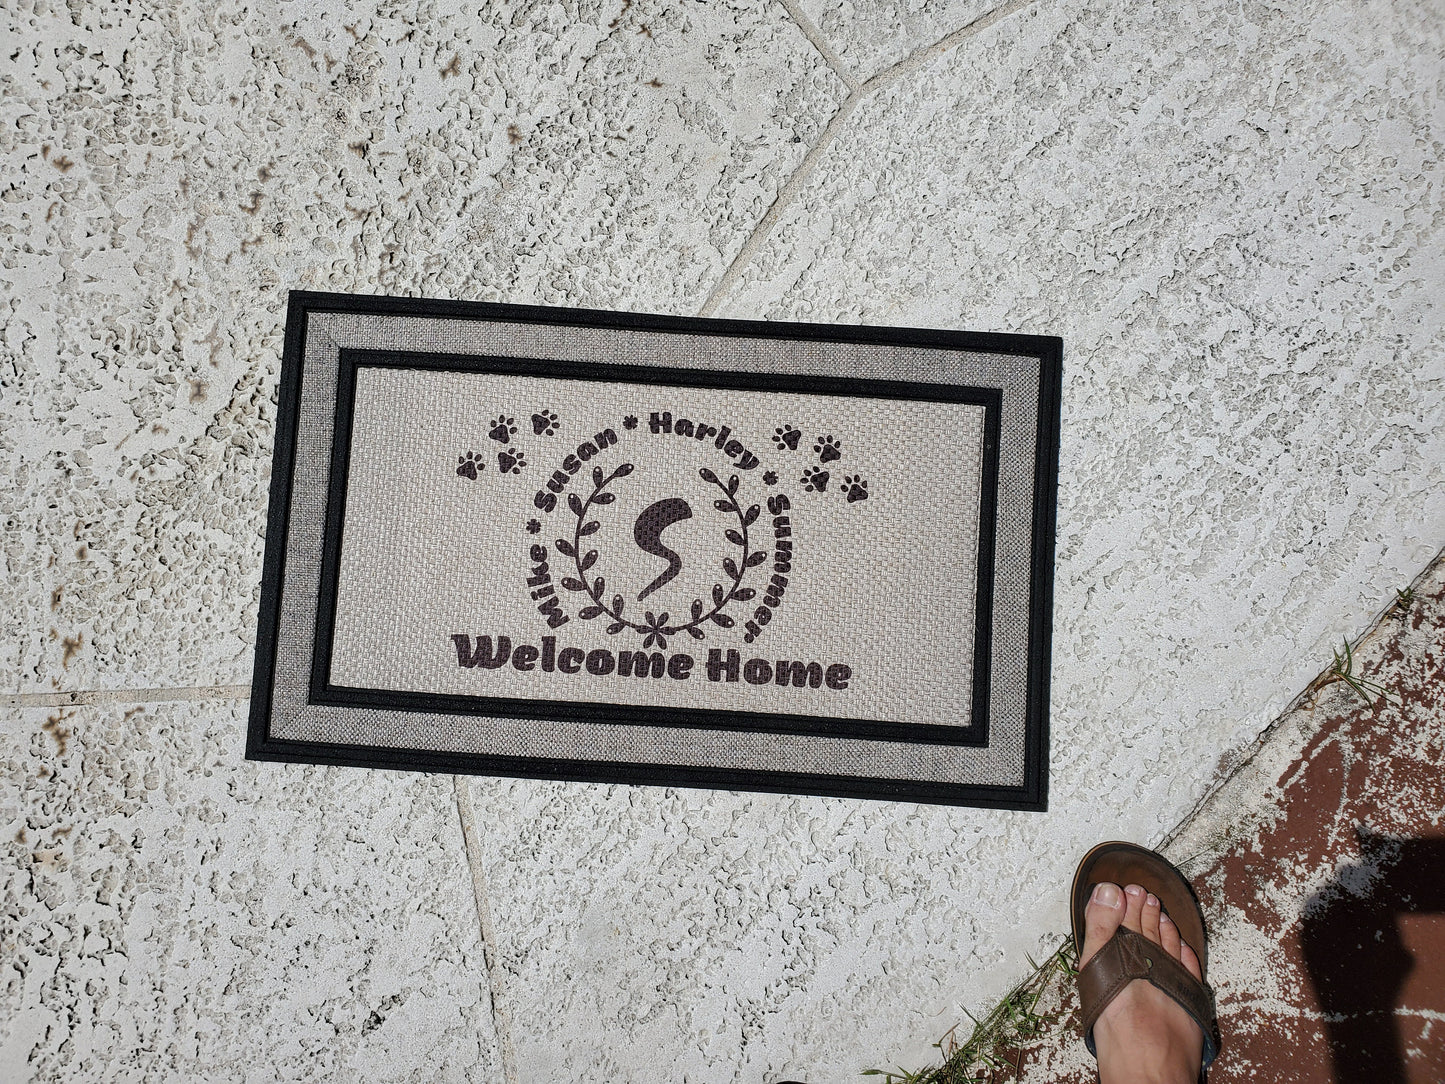 Personalized Welcome to the Circus Mat, 18 x 30 inch Farmhouse Decor Custom Mat. Housewarming Wedding Gift. Can Be Custom Made